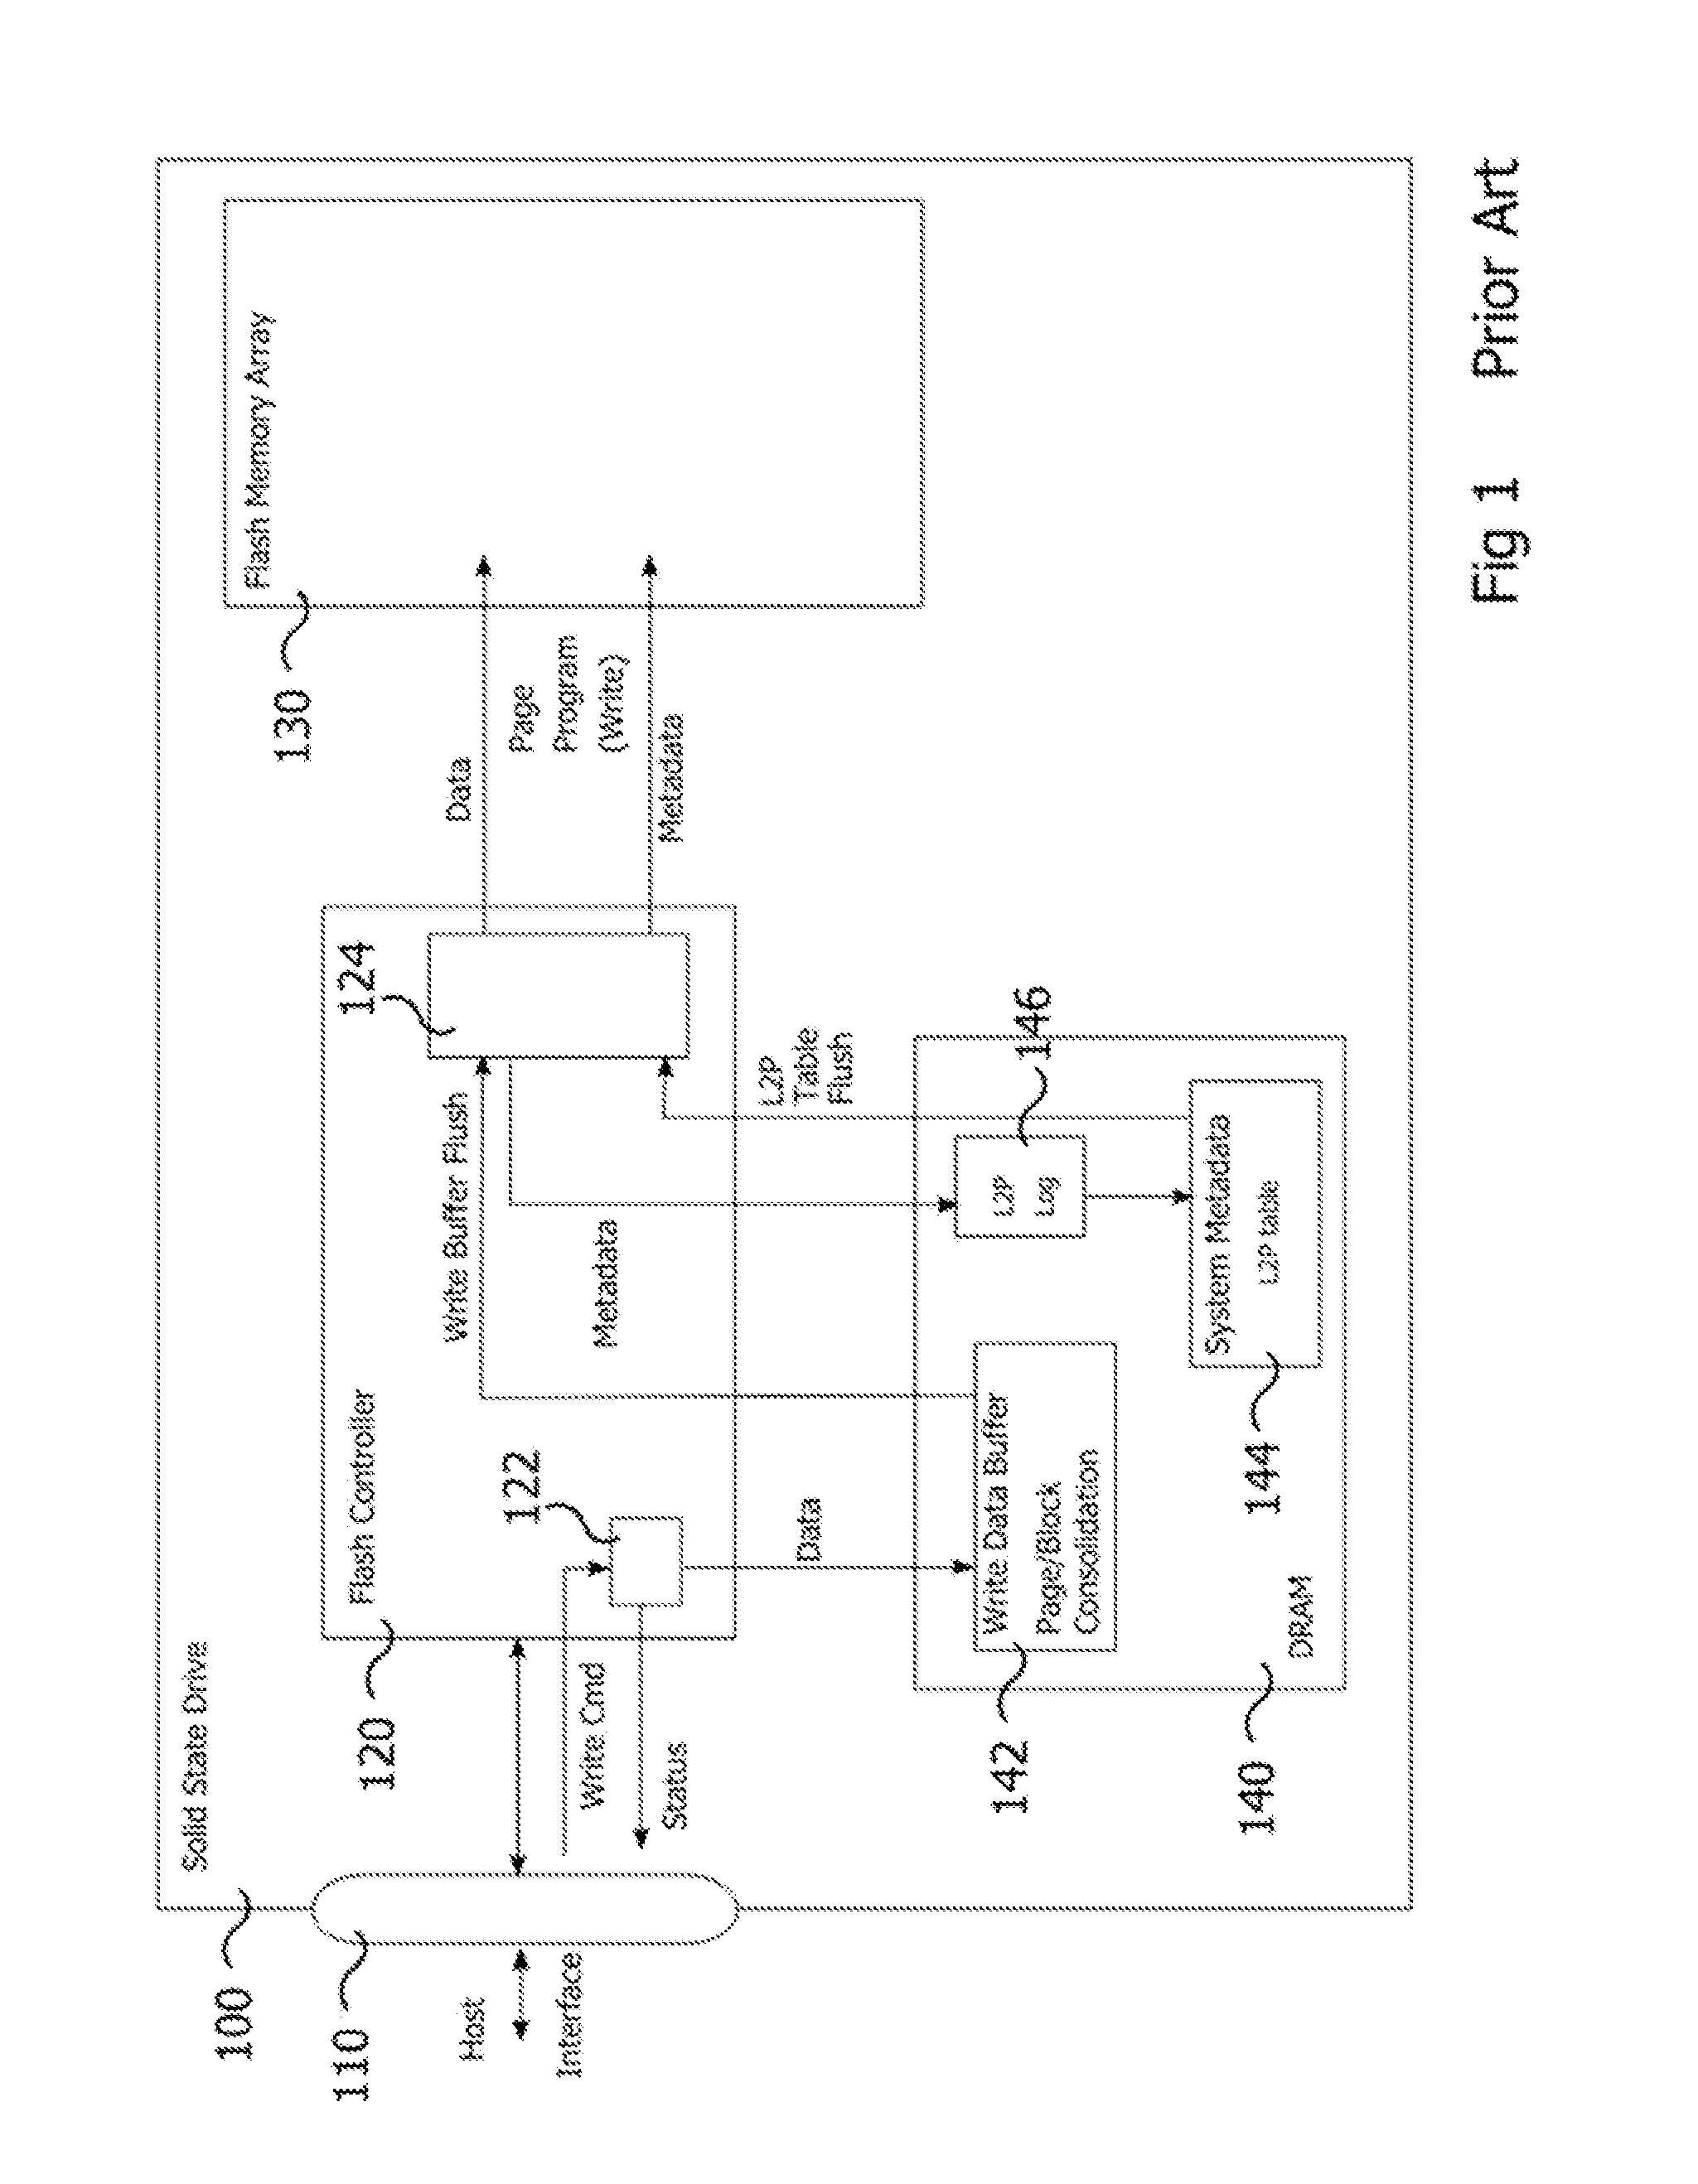 Solid-state mass storage device and method for processing forced unit access write commands